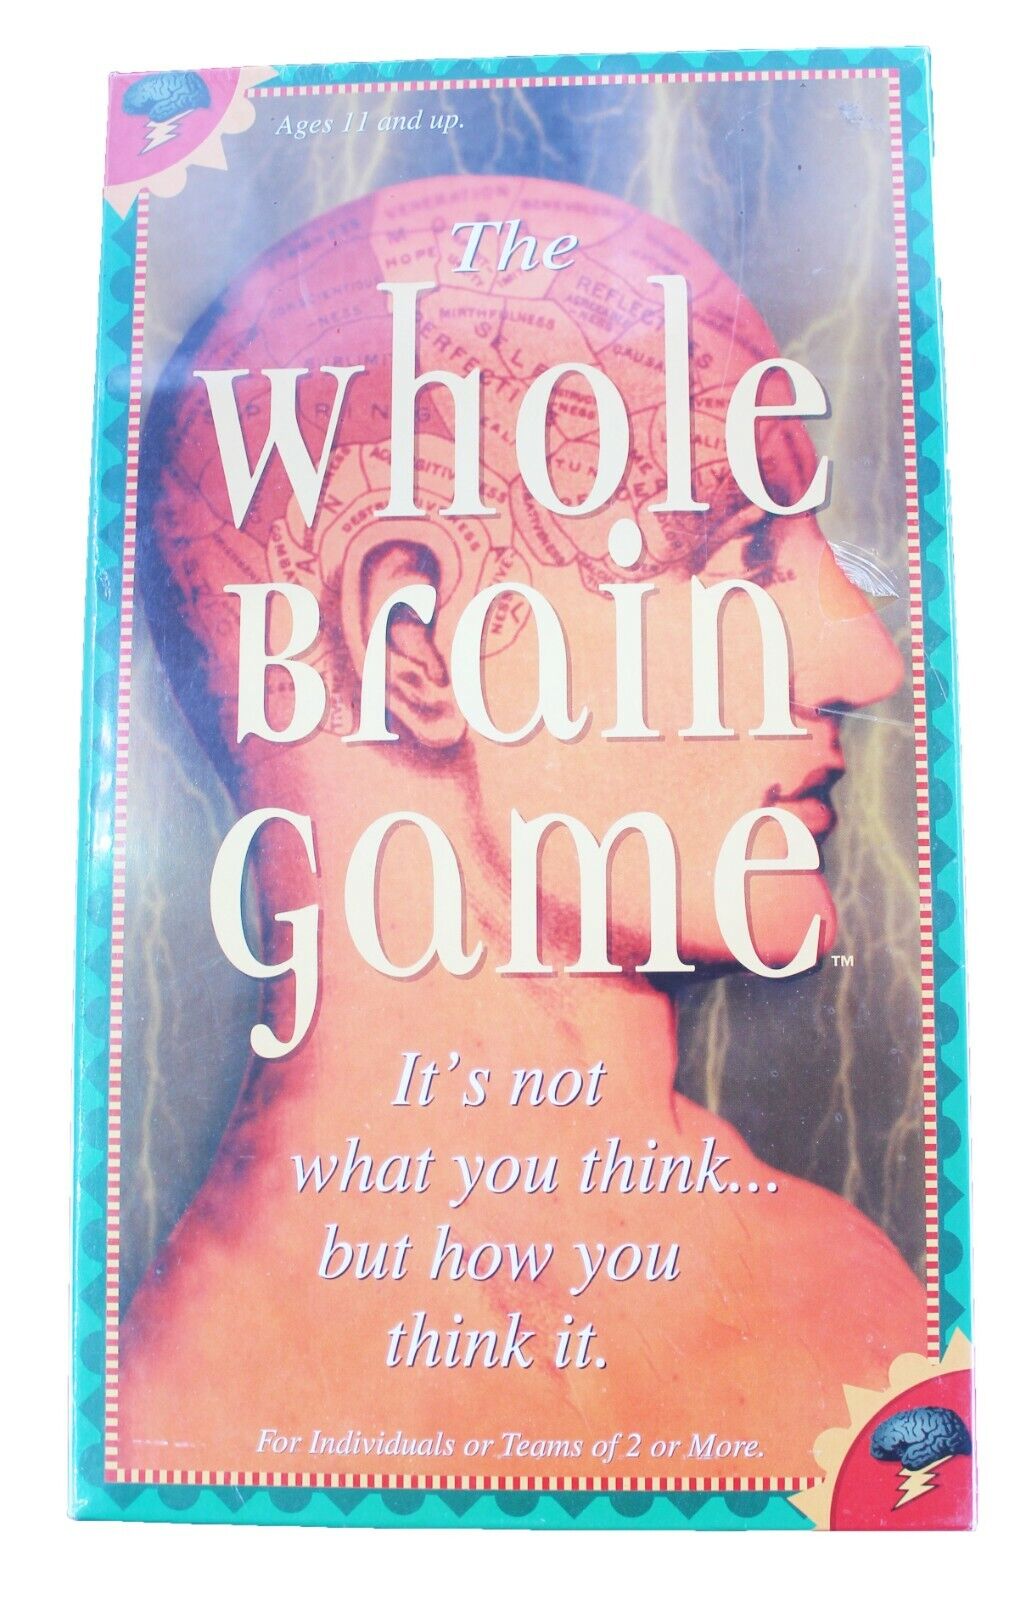 NEW The Whole Brain Game Creative Mind Games 1999 Ages 11 and up